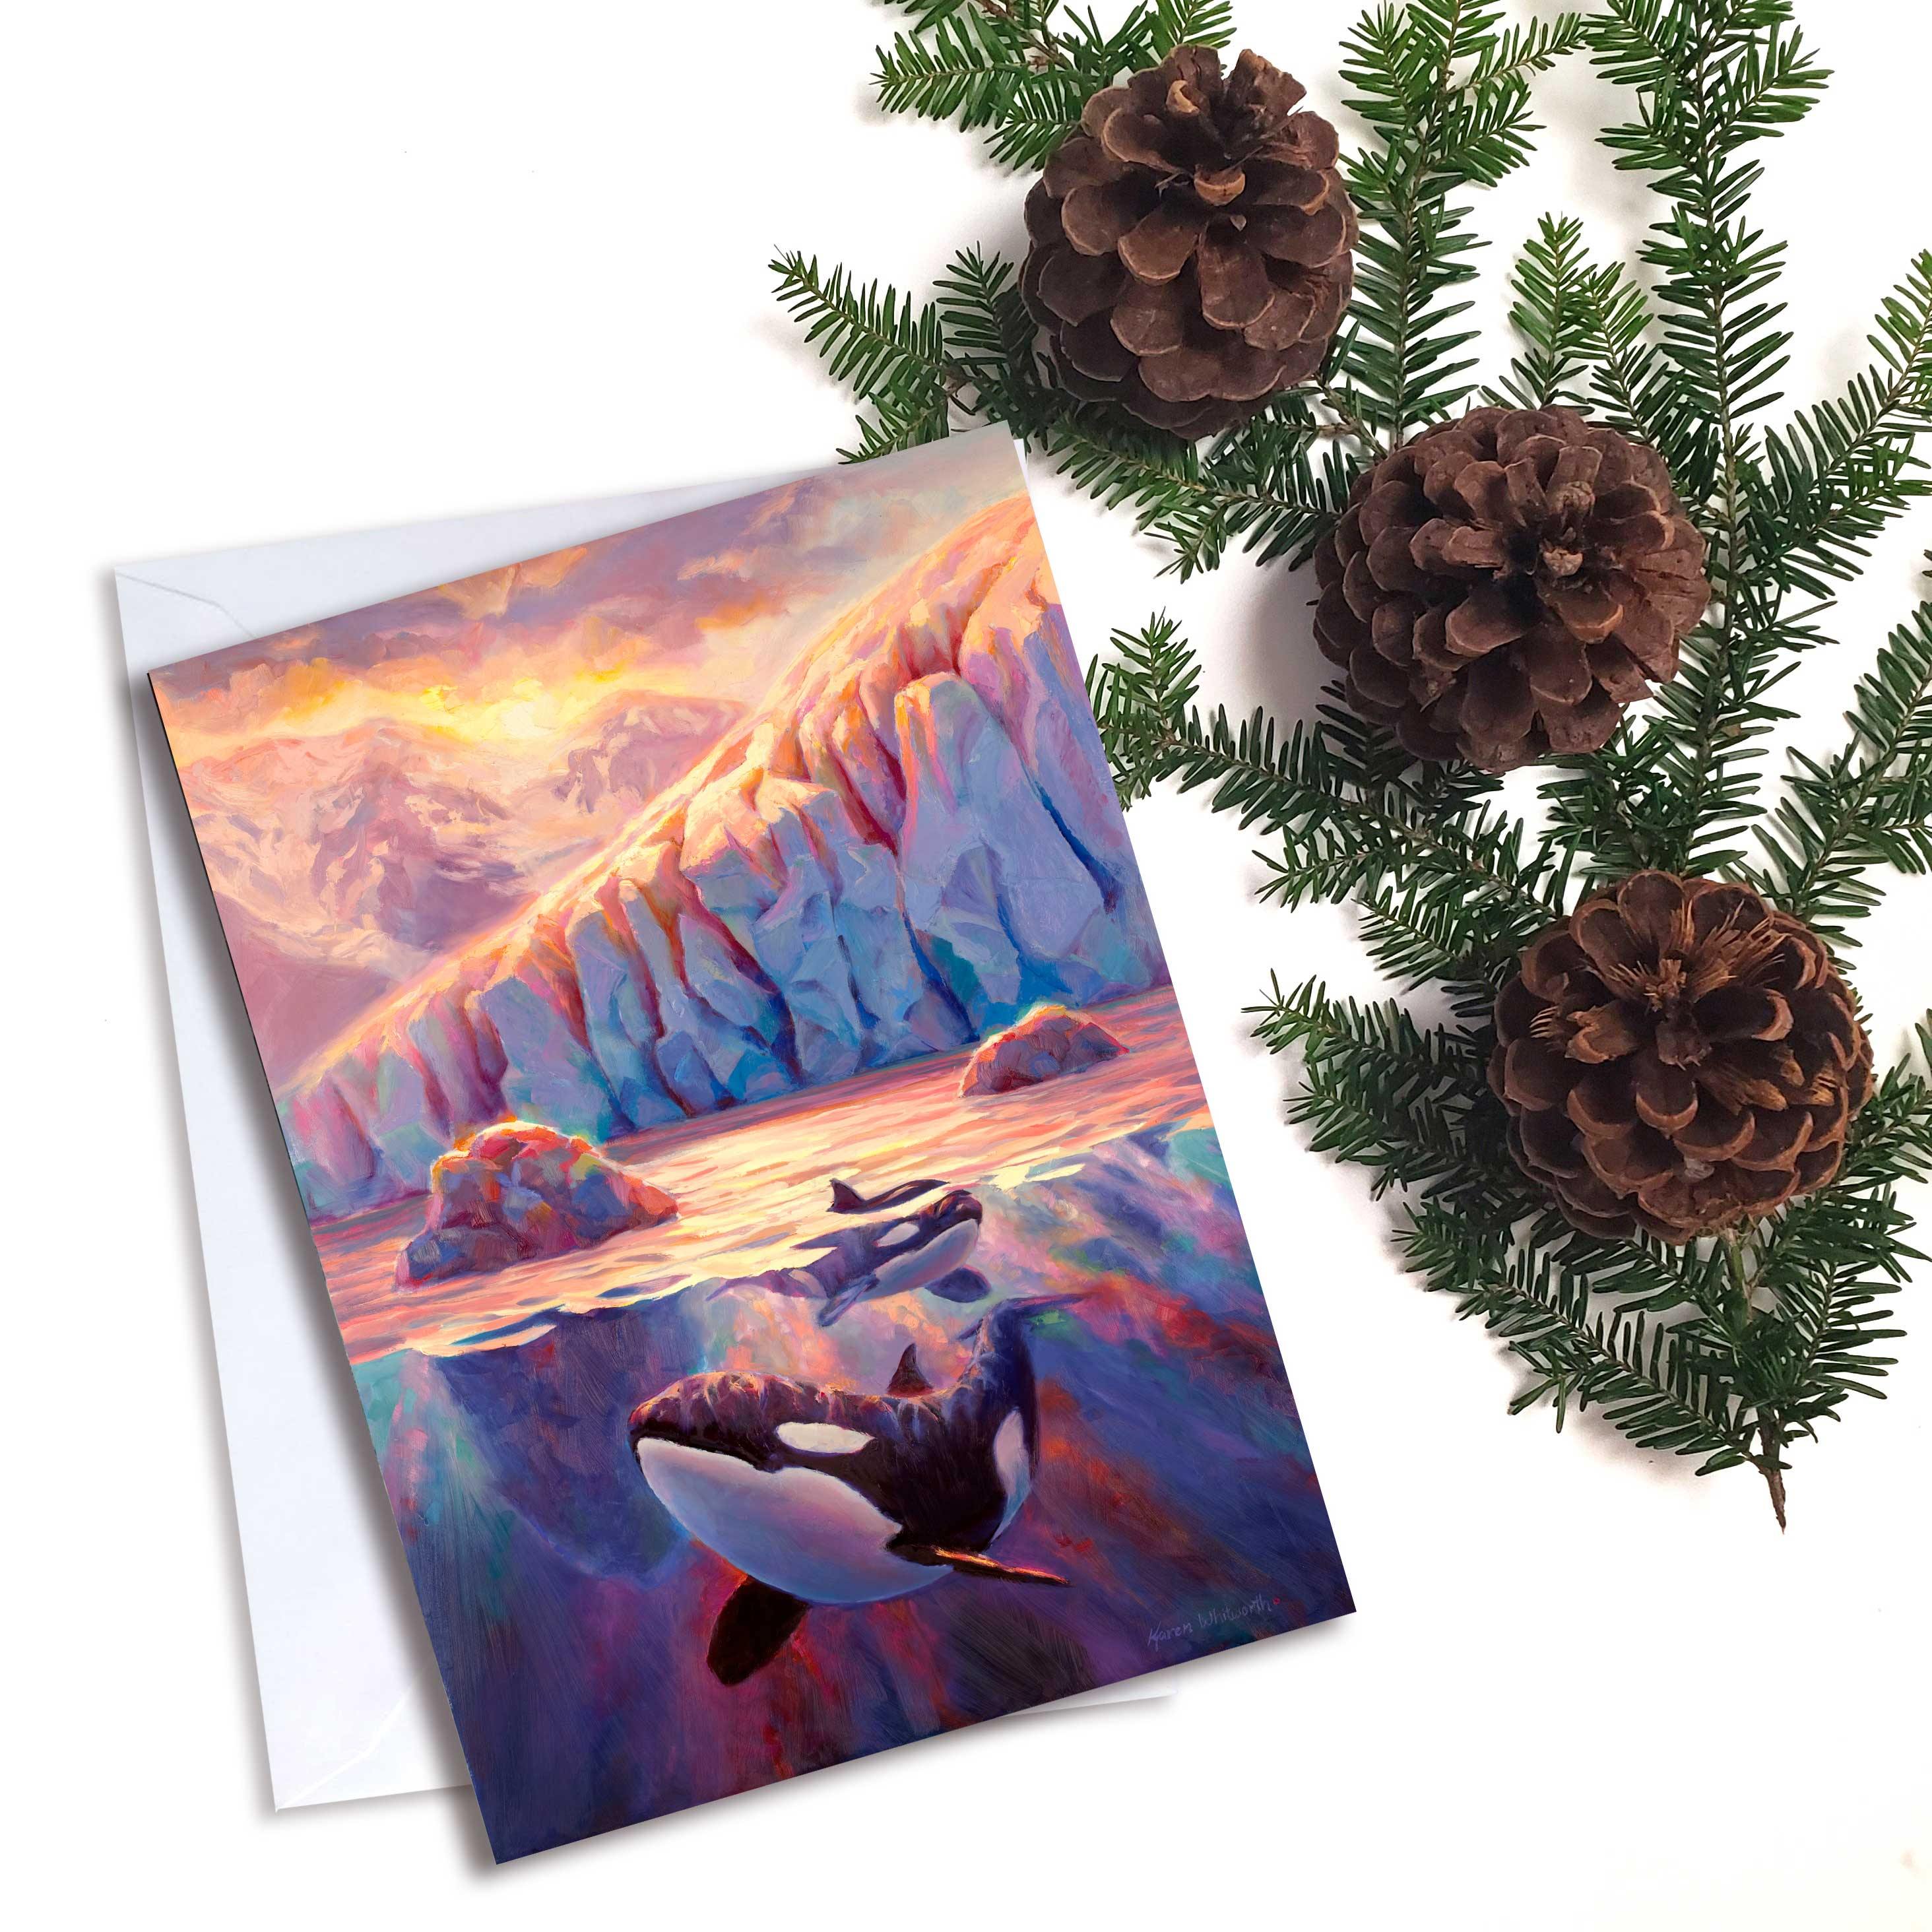 Orca Killer Whale greeting card with Glacier Fjord at Sunrise by Alaska artist Karen Whitworth